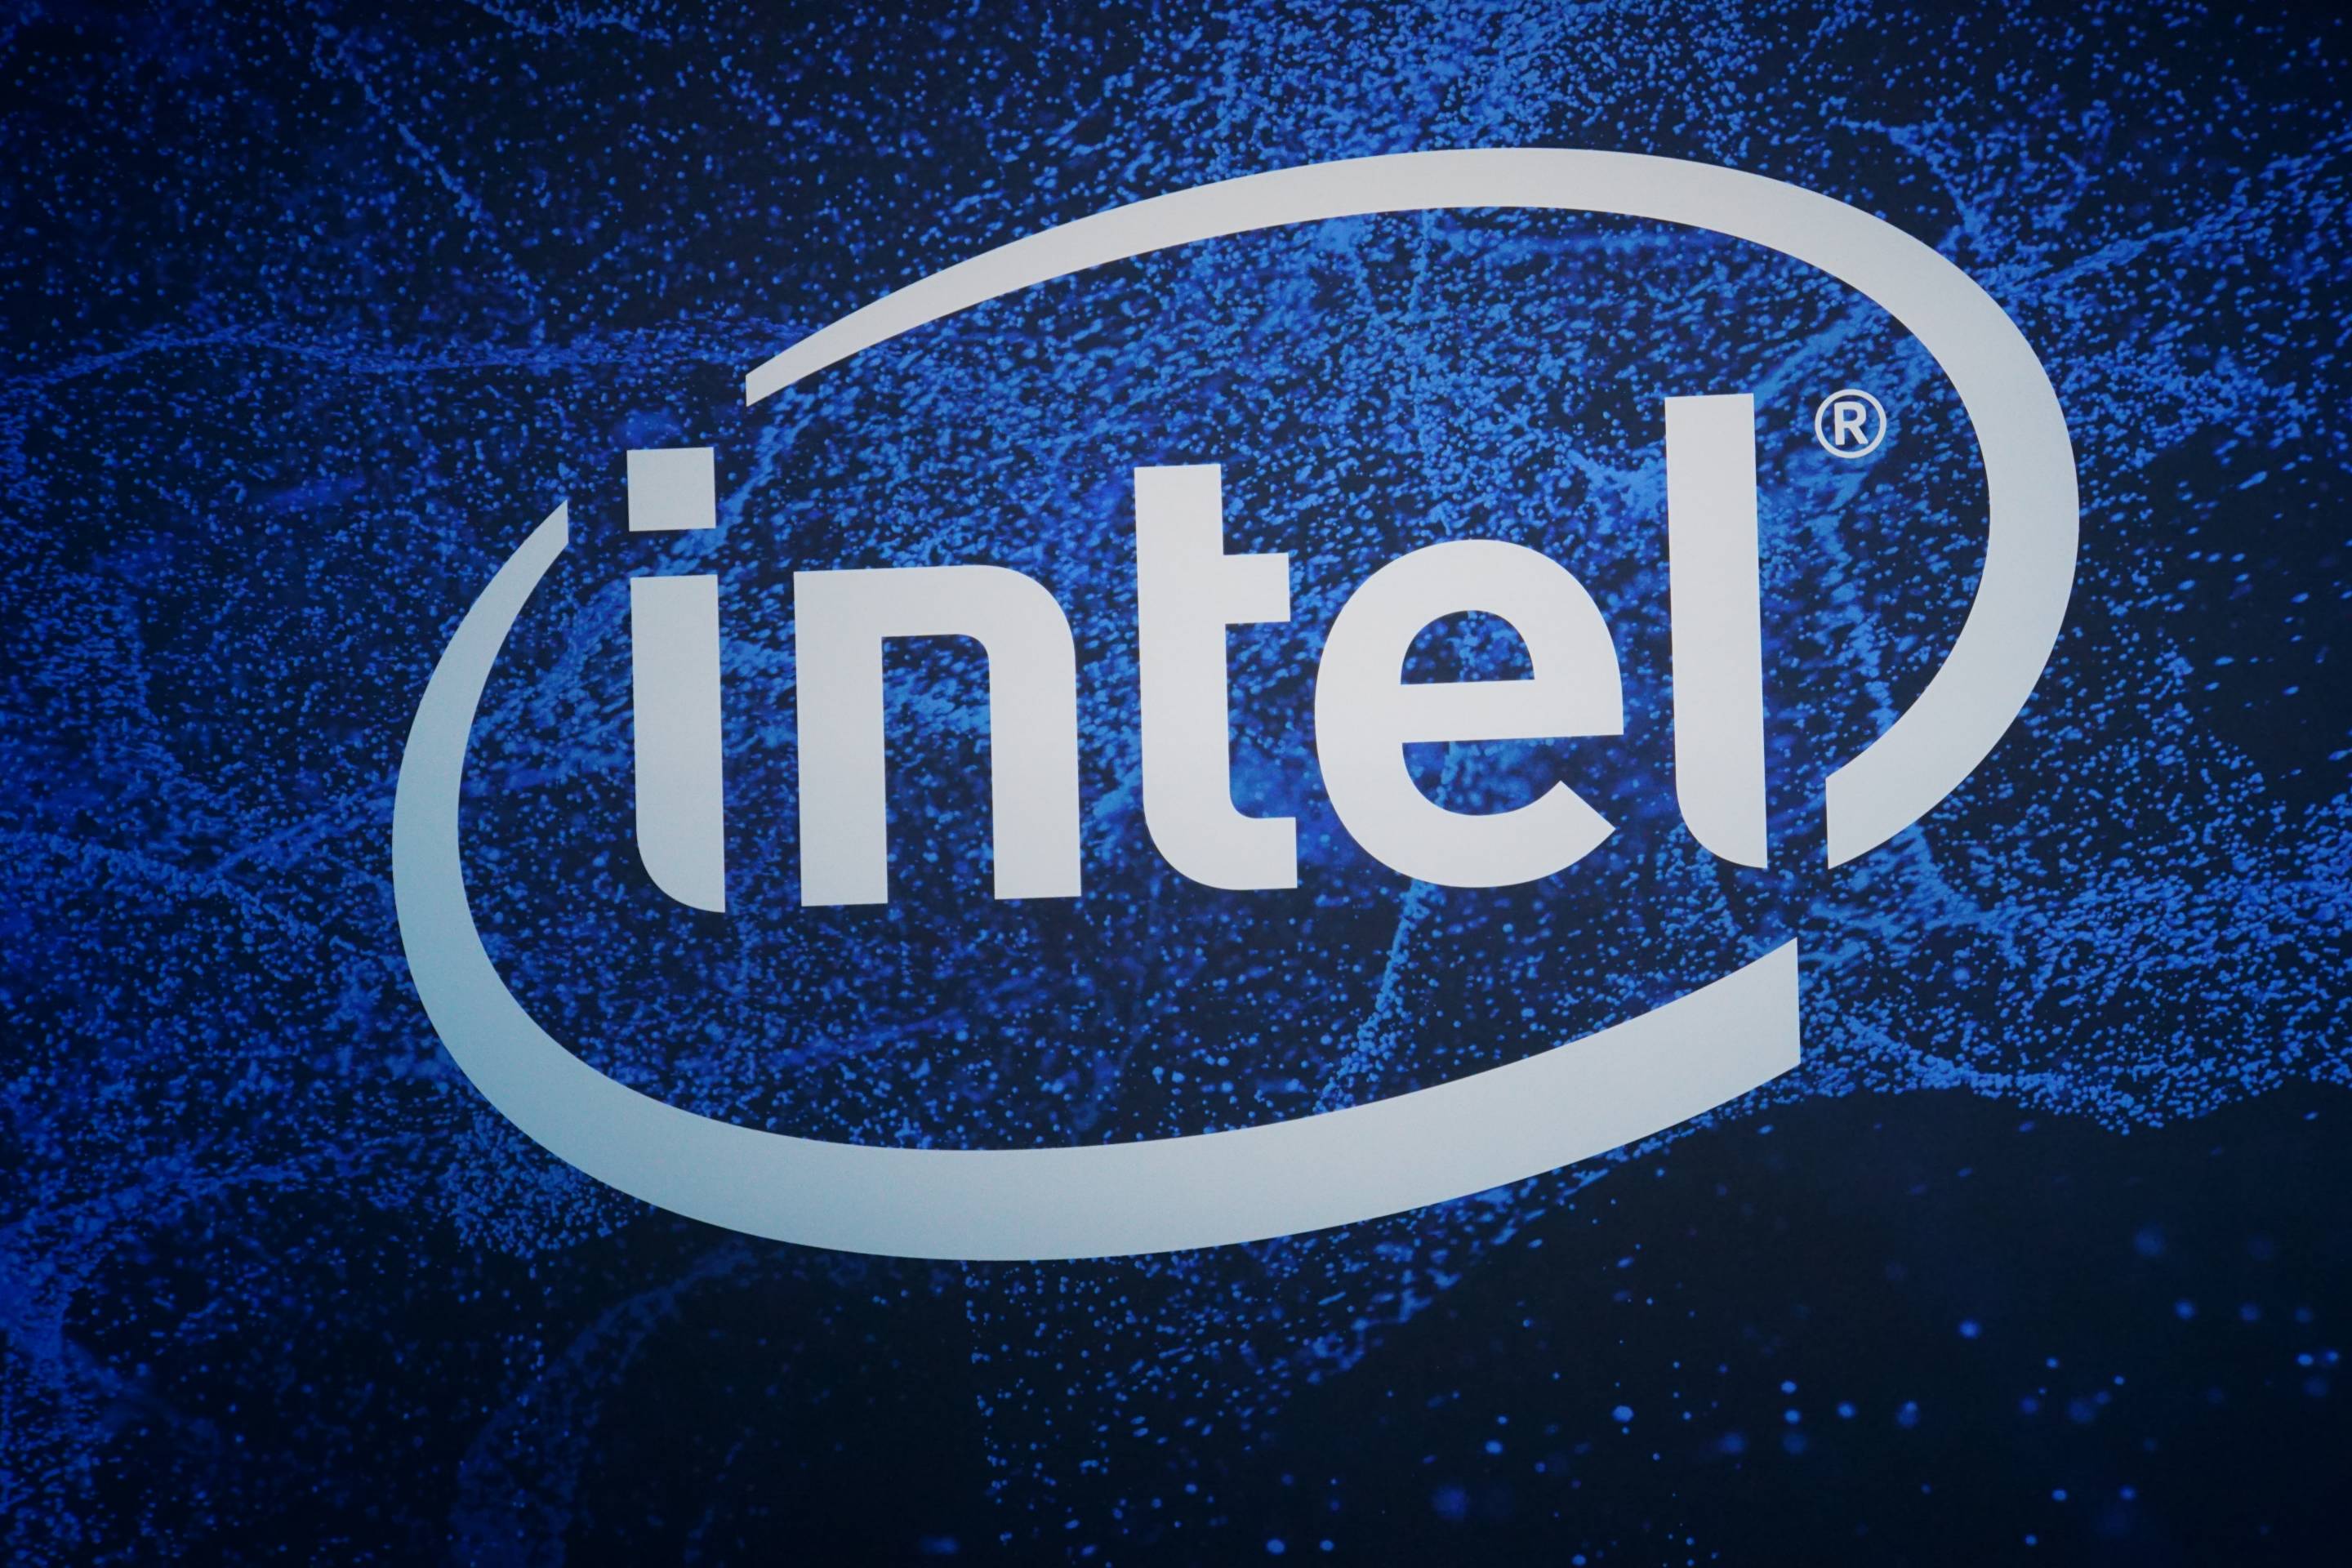 Intel’s 2019 Caused Investor Jitters And Stock Prices Barely Missed Its Worst One-Day Nosedive In 11 Years